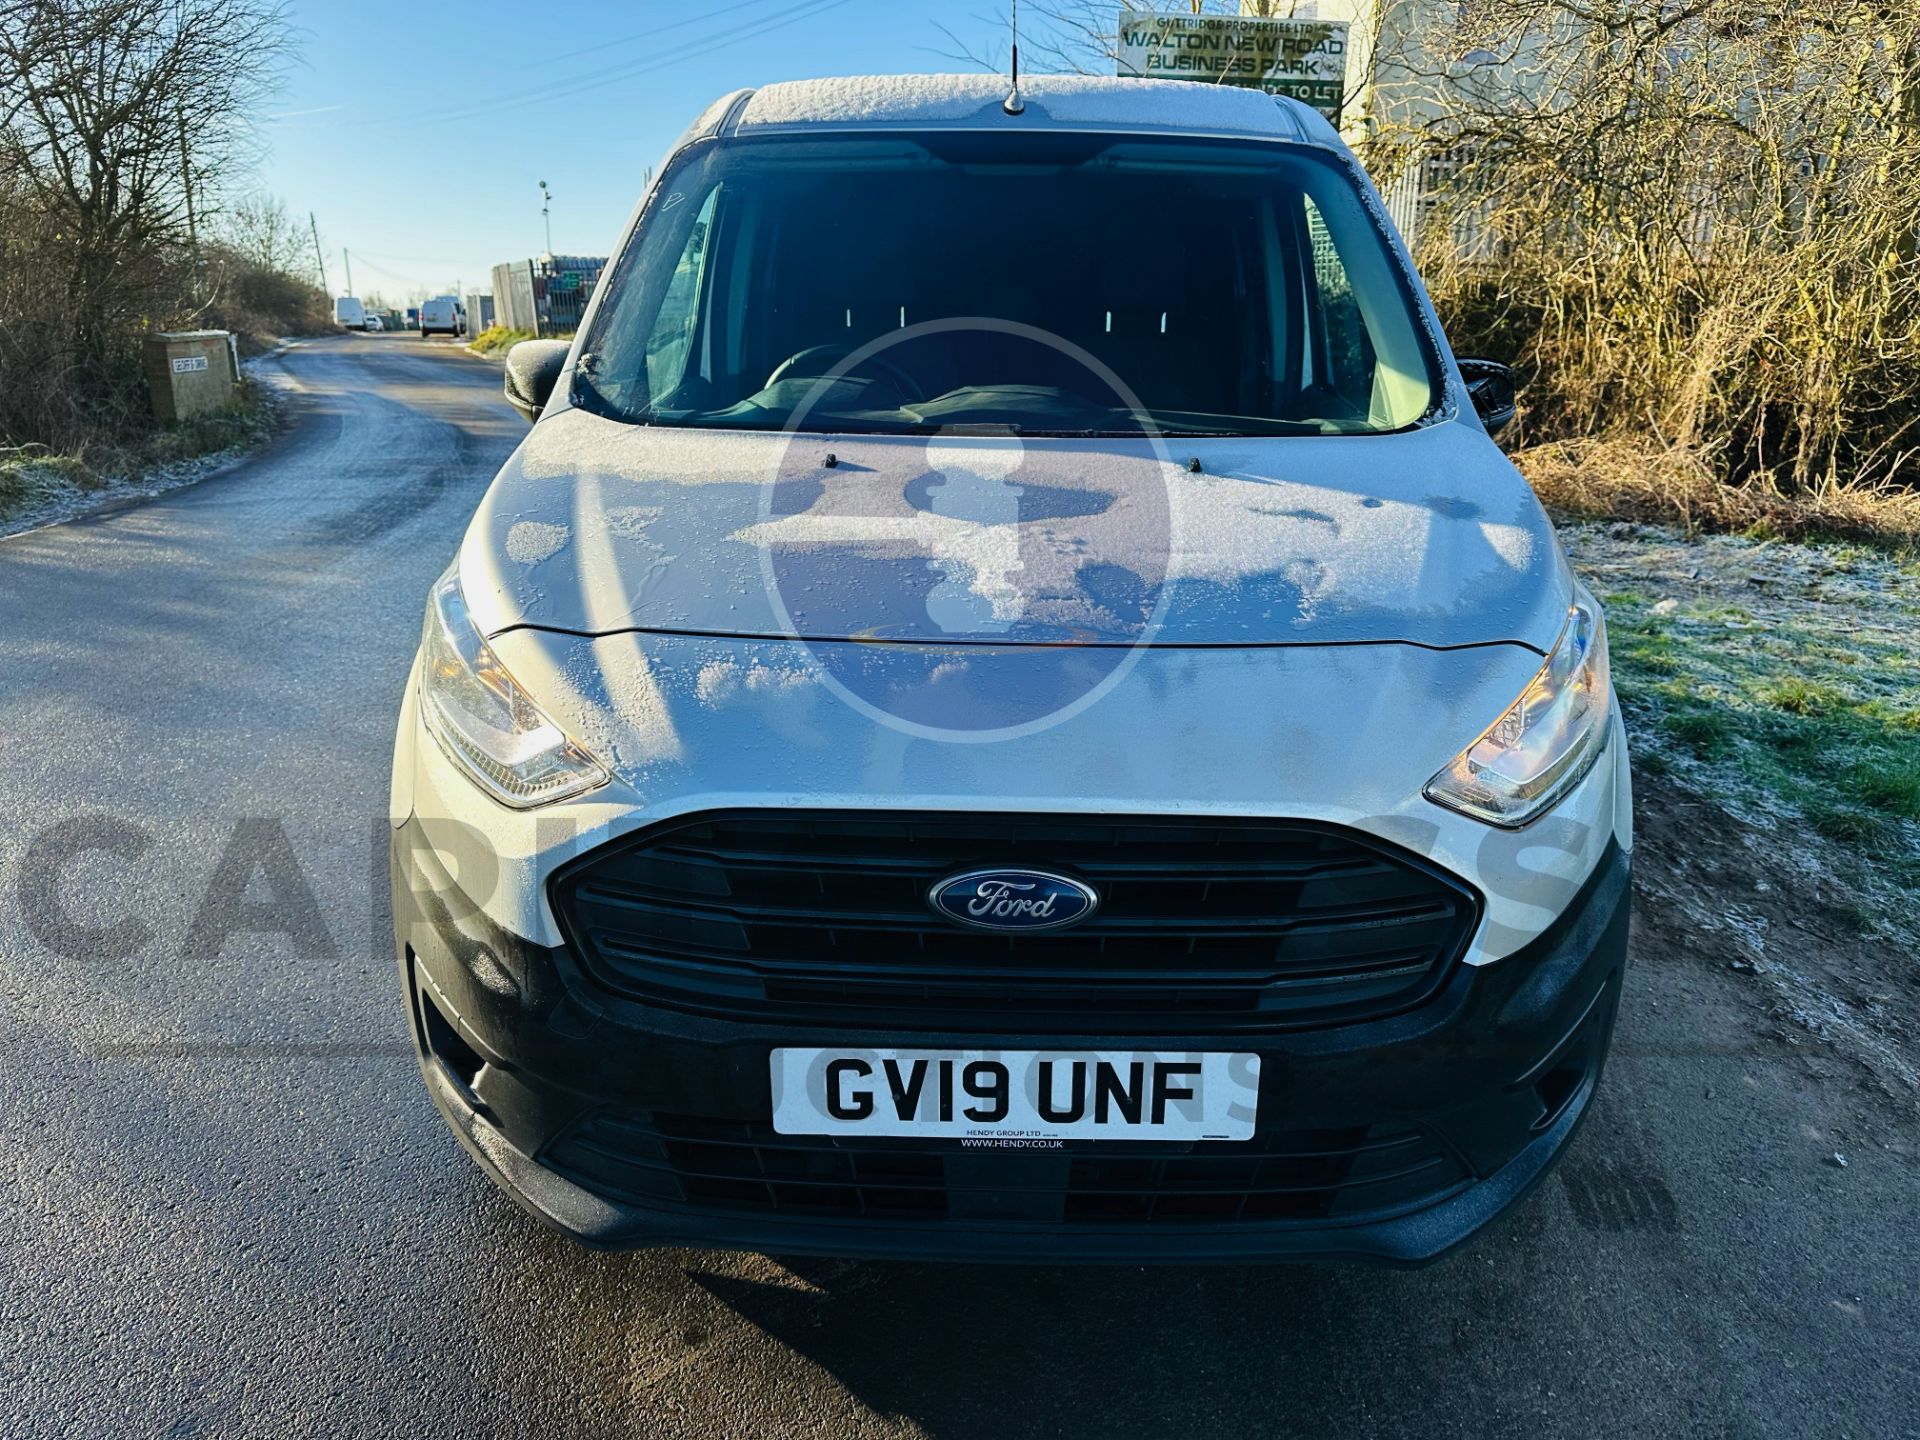 (ON SALE) FORD TRANSIT CONNECT 1.5 Tdci LWB 5 SEAT CREW VAN "EURO 6" - AIR CON - SILVER - 19 REG - Image 3 of 29